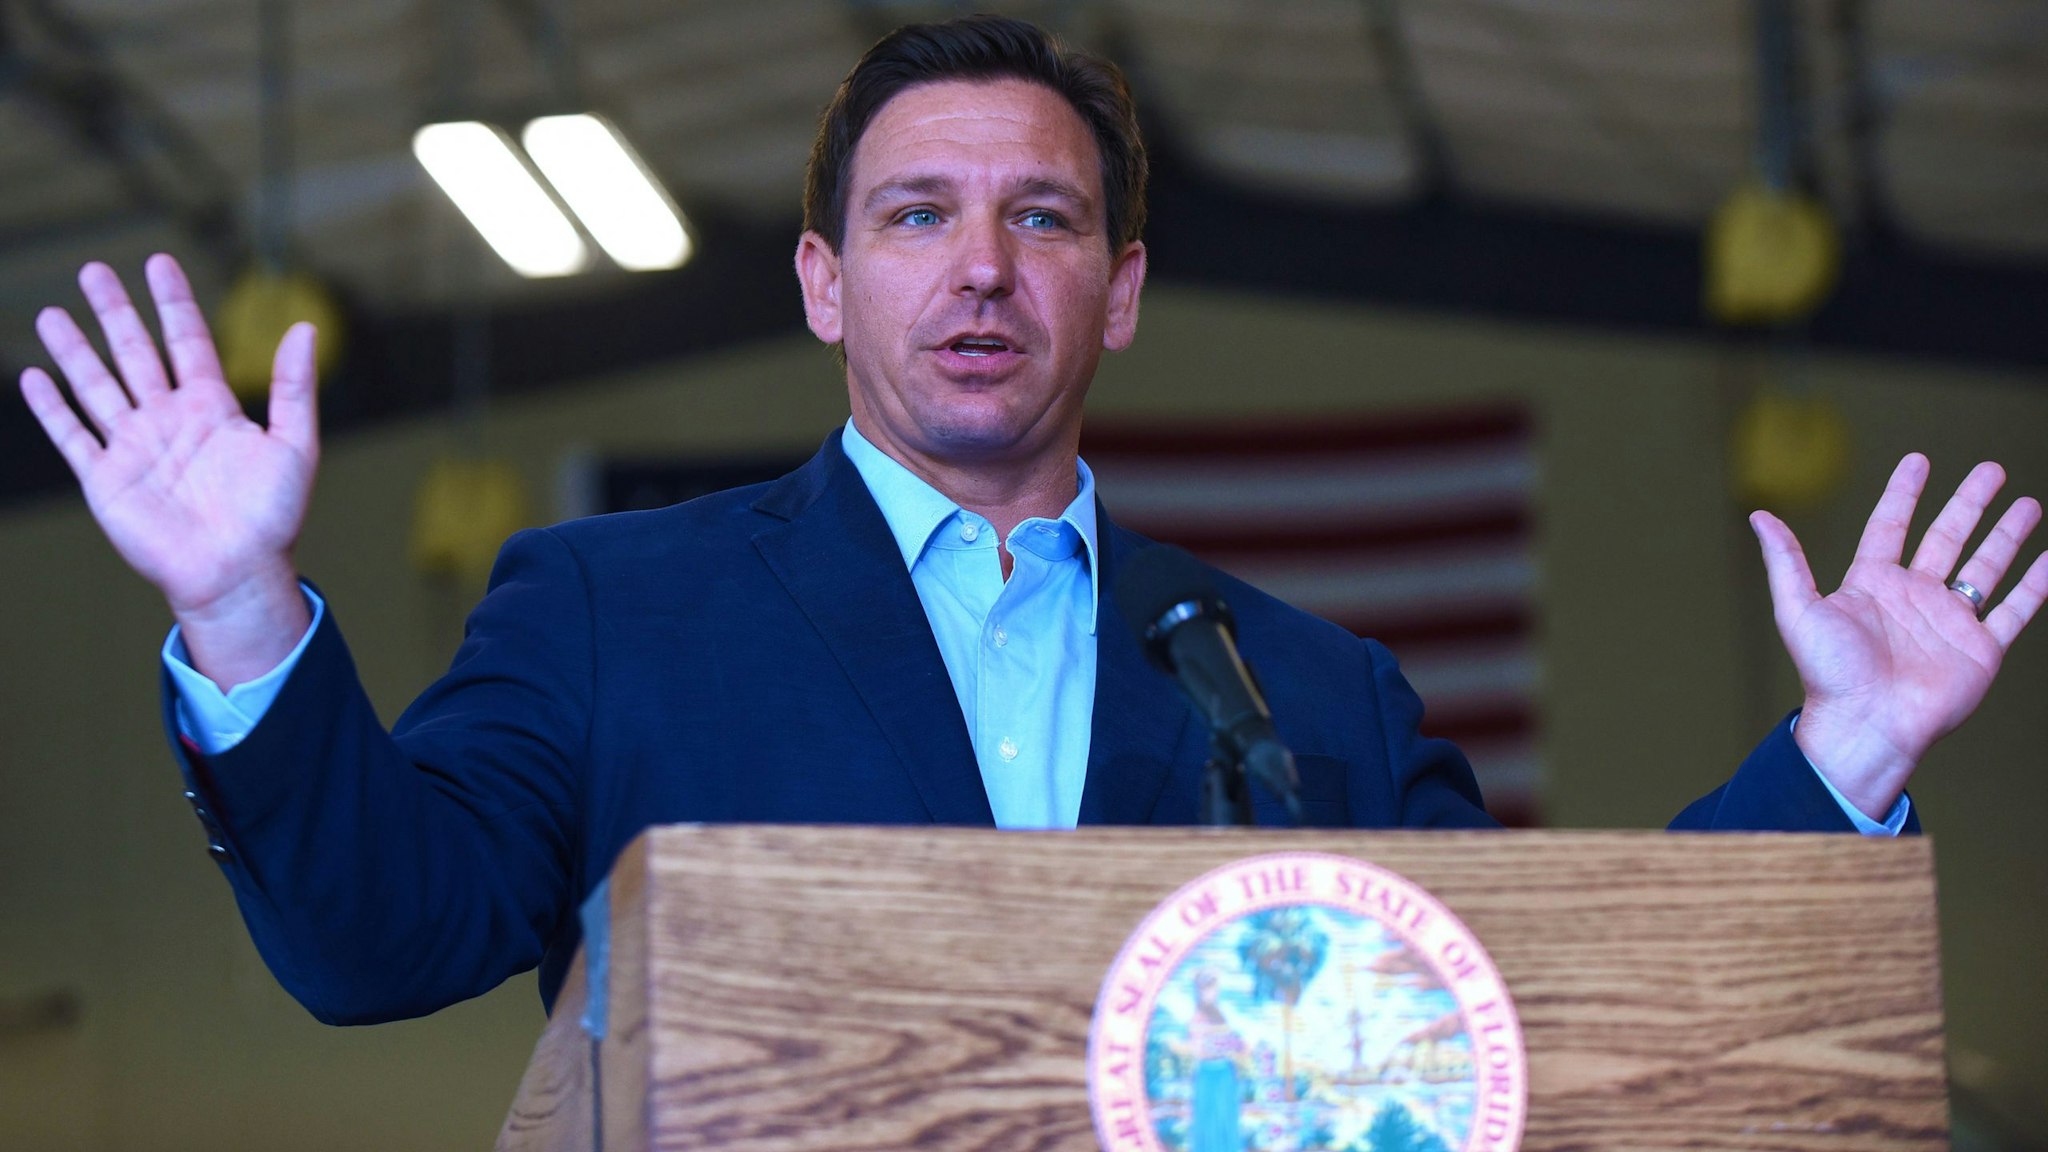 MELBOURNE, FLORIDA, UNITED STATES - 2021/03/22: Florida Governor, Ron DeSantis speaks at a press conference at the Eau Gallie High School aviation hangar. DeSantis announced he is asking the legislature for $75 million of federal funds to support what hes dubbed the Get There Faster initiative, aimed at boosting access to technical education programs for both high school students and adult learners.